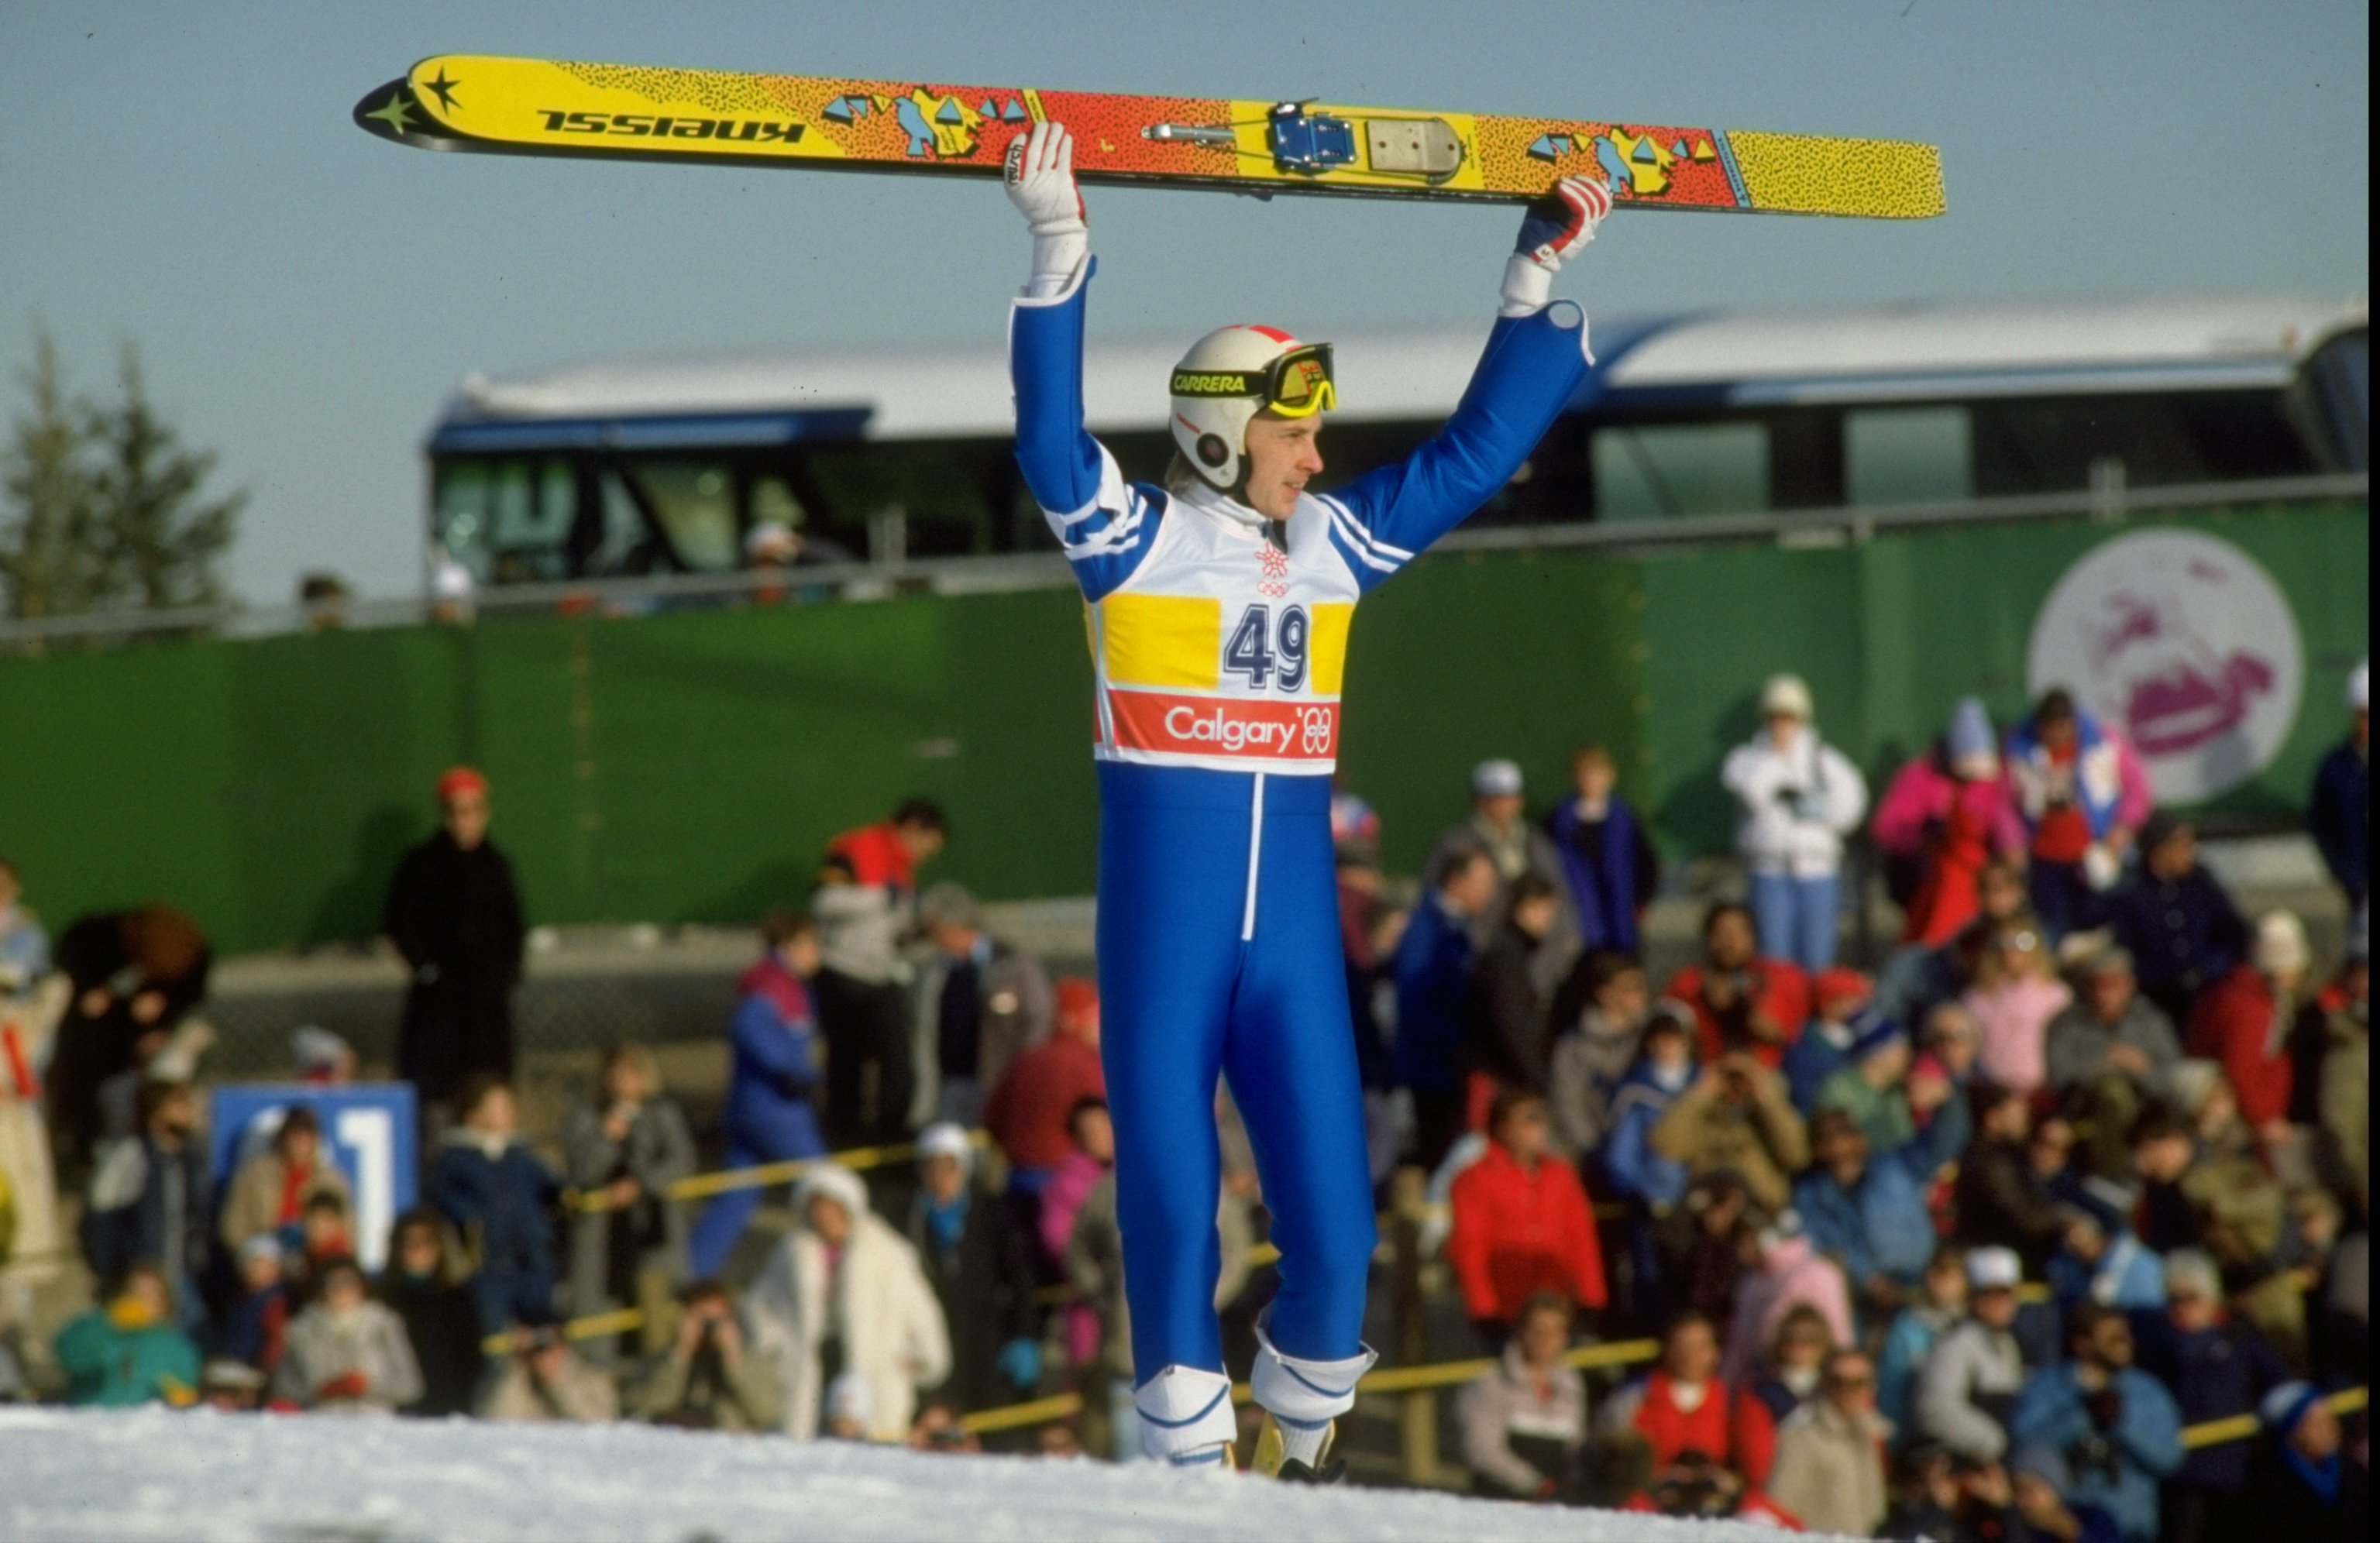 23 Feb 1988: Matti Nykanen of Finland holds his skies aloft after the 90 metres Ski Jump event at the 1988 Winter Olympic Games in Calgary, Canada. Nykanen won the gold medal with a jump of 224 metres. \ Mandatory Credit: Allsport UK /Allsport